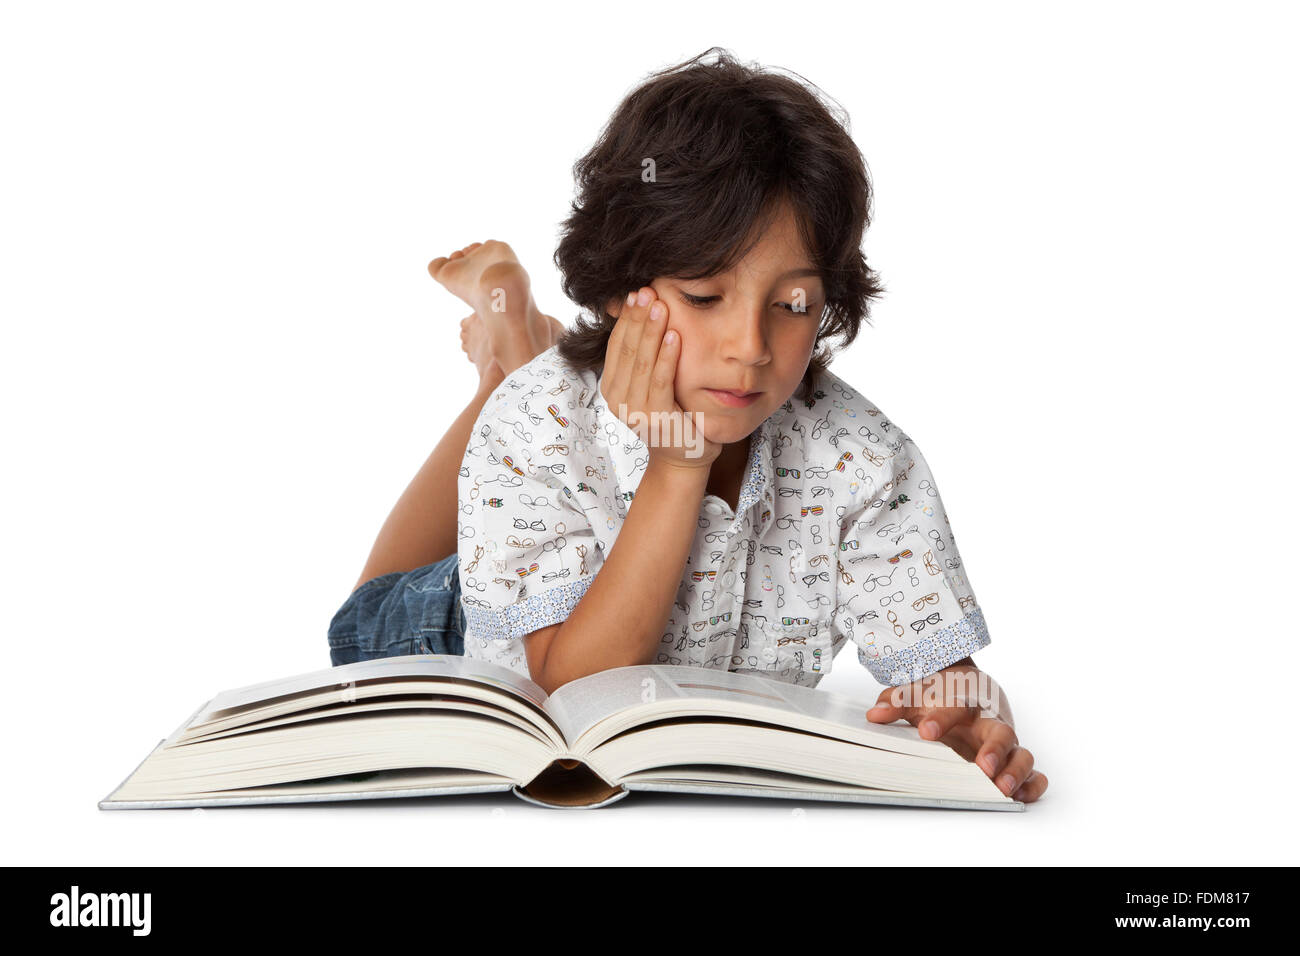 Little boy is reading a book on white background Stock Photo